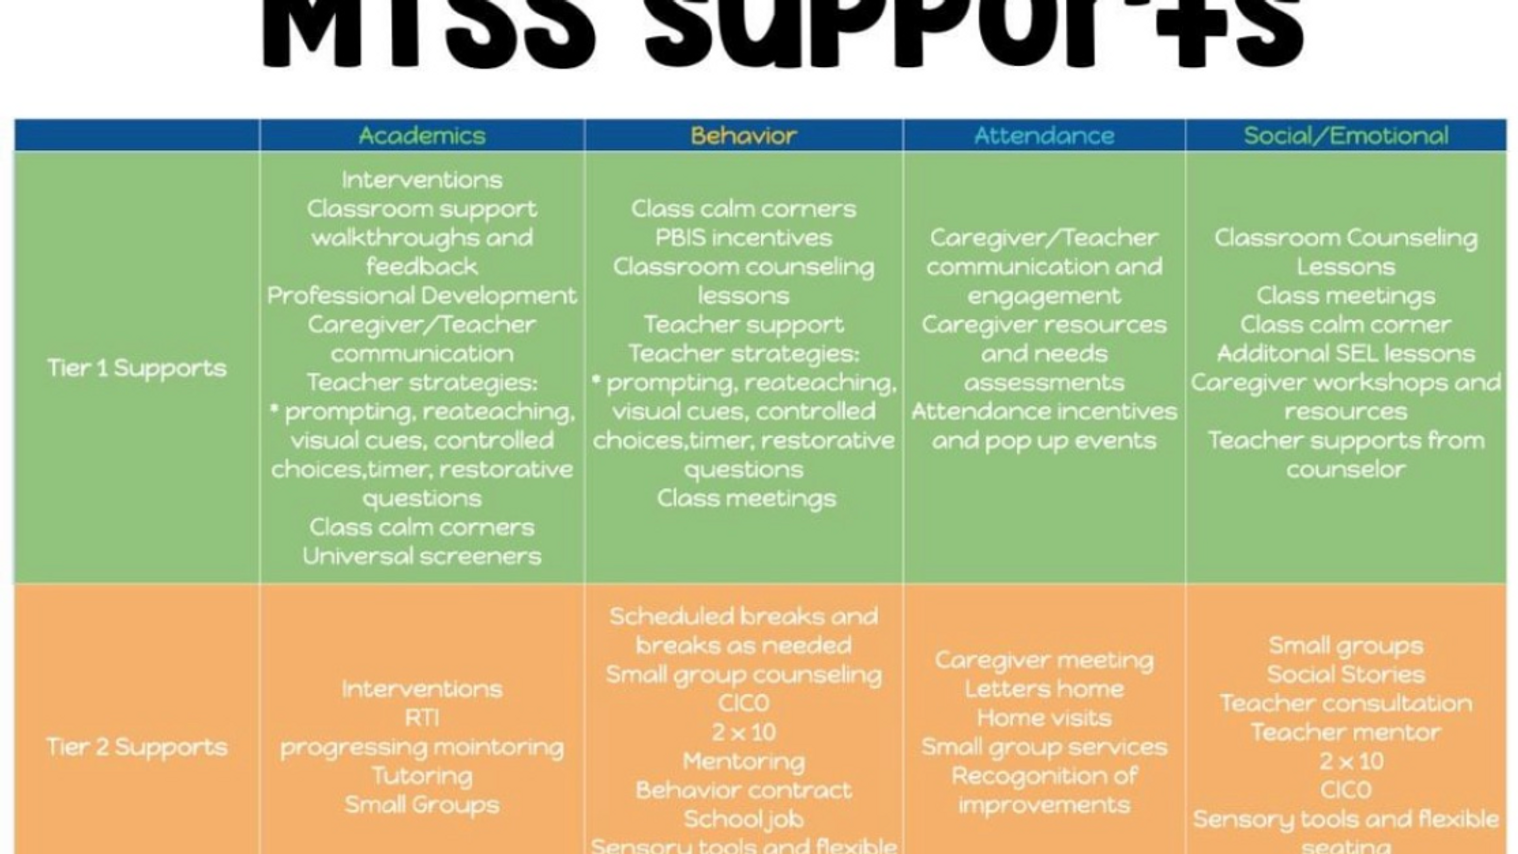 Mental Health and MTSS Series